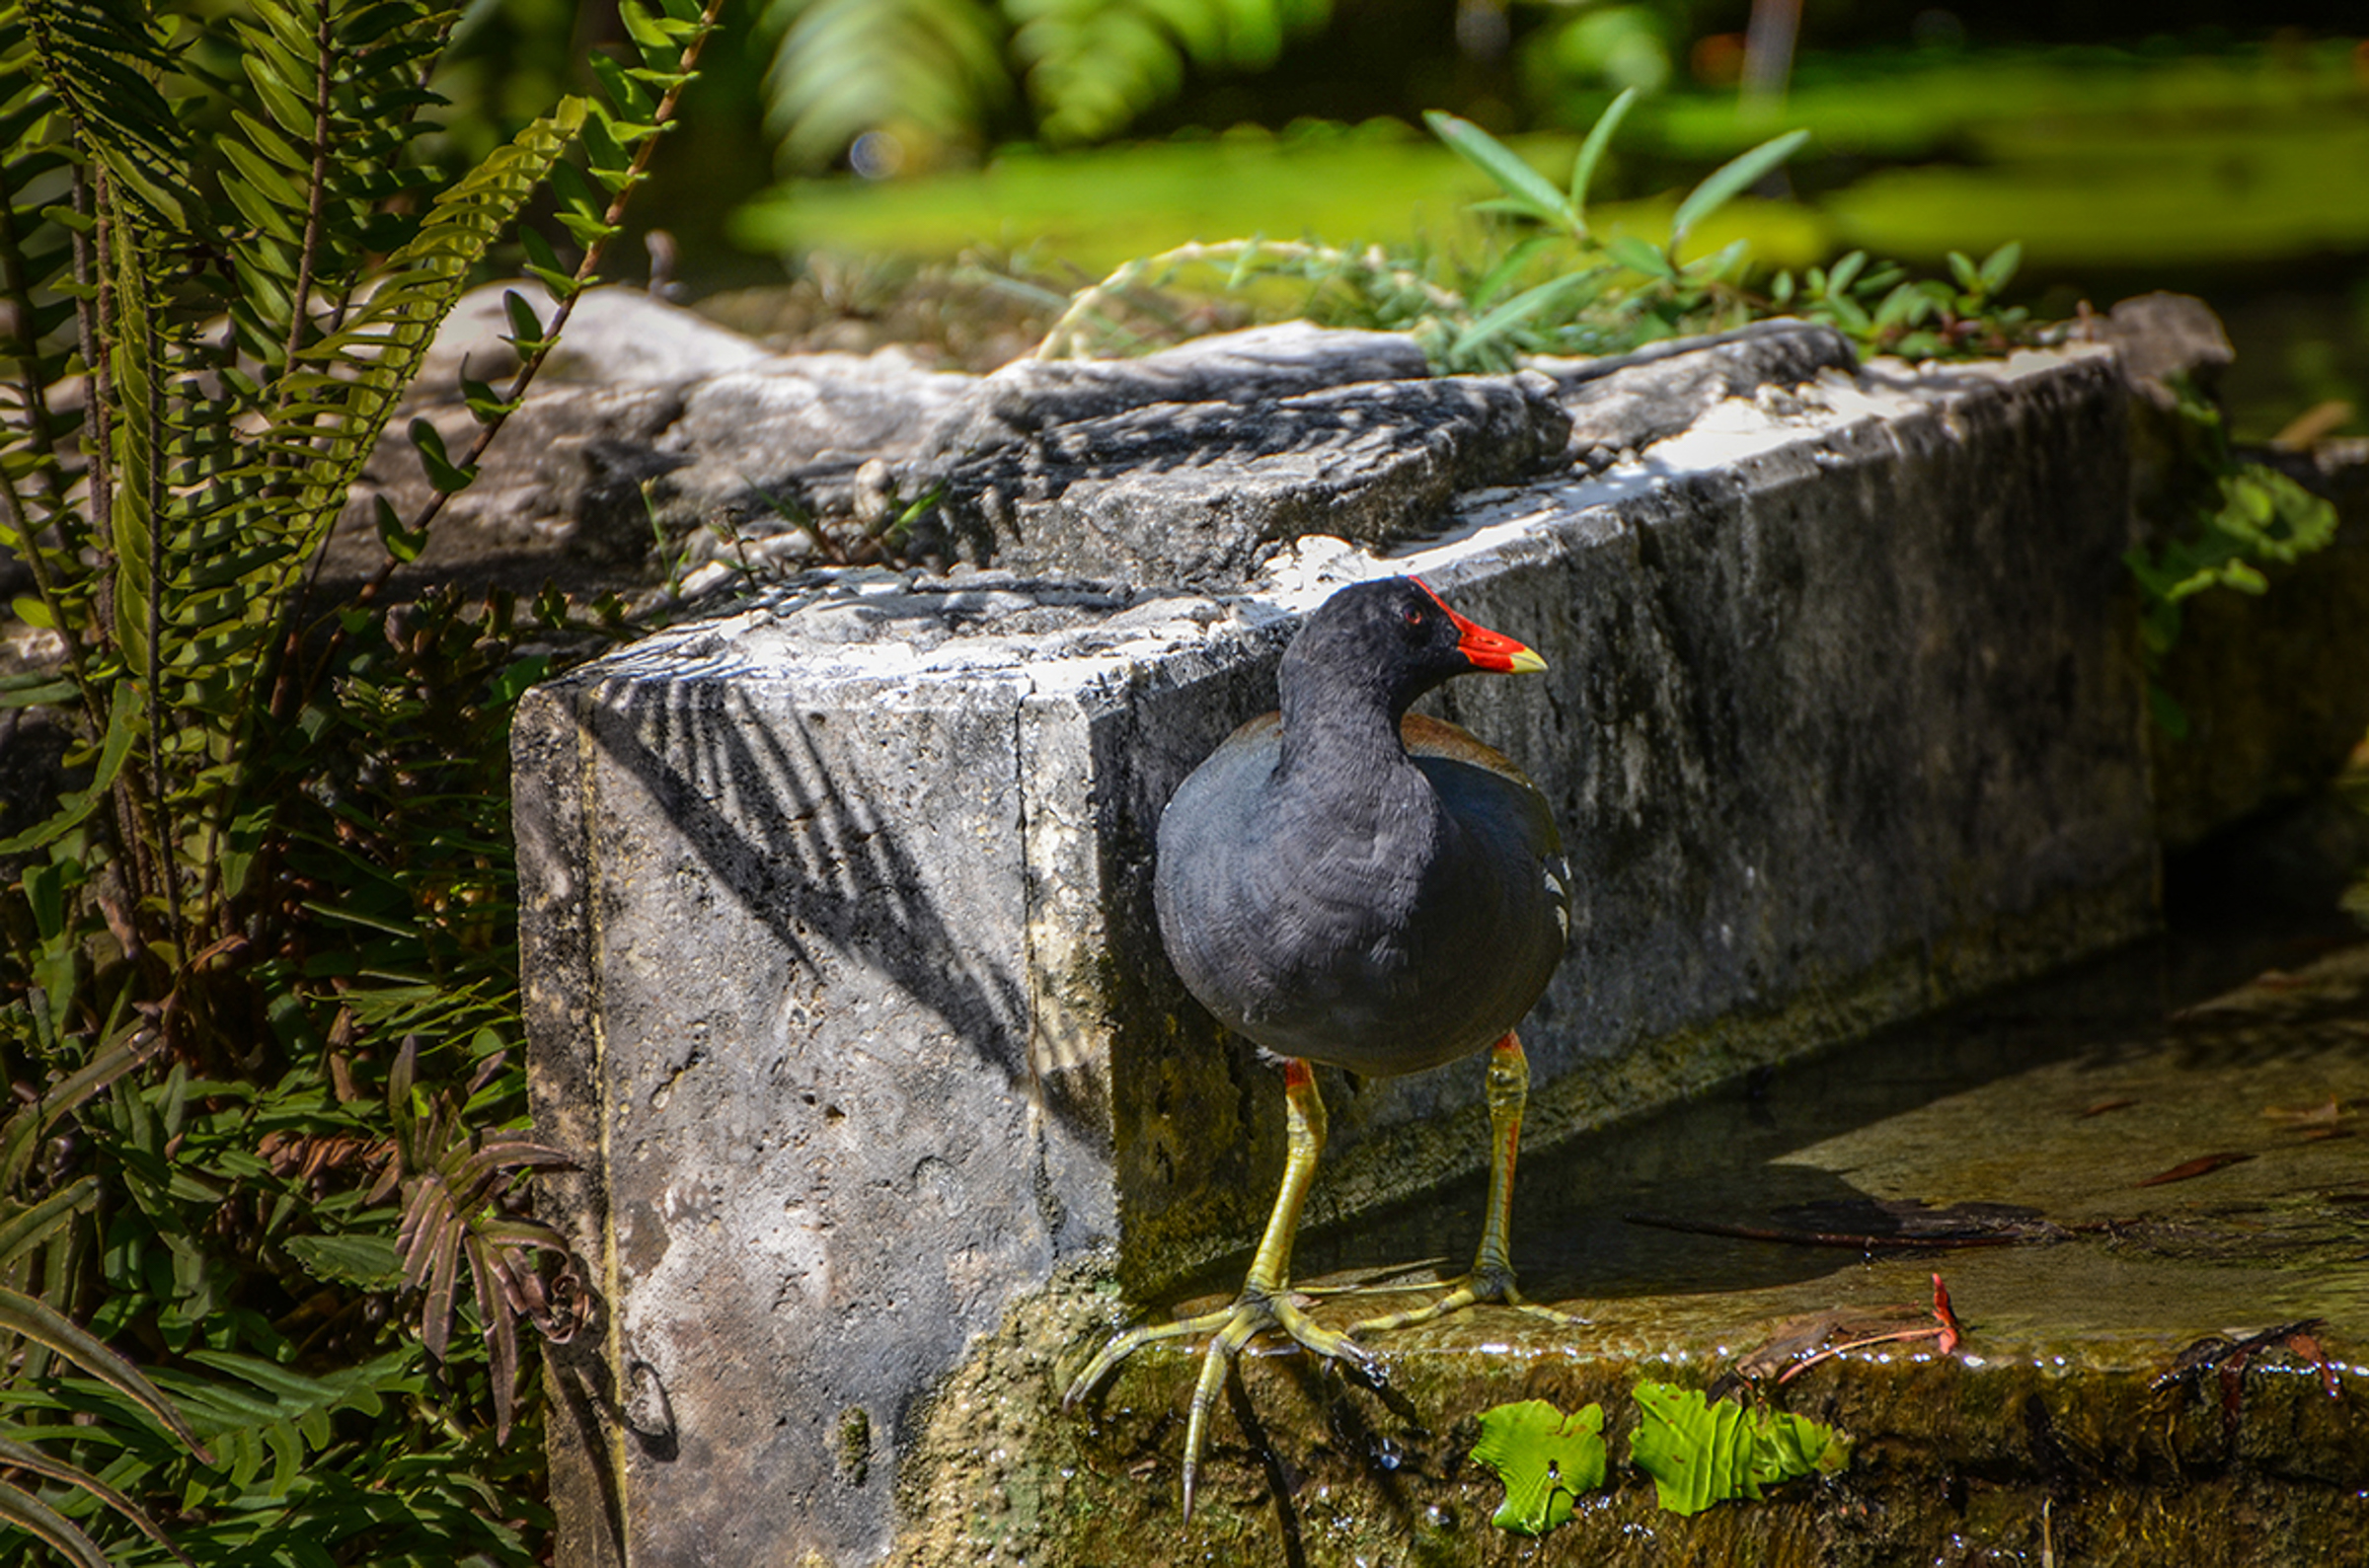 A Common Gallinule stands at the edge of a water body, with a big cement brick in the background.